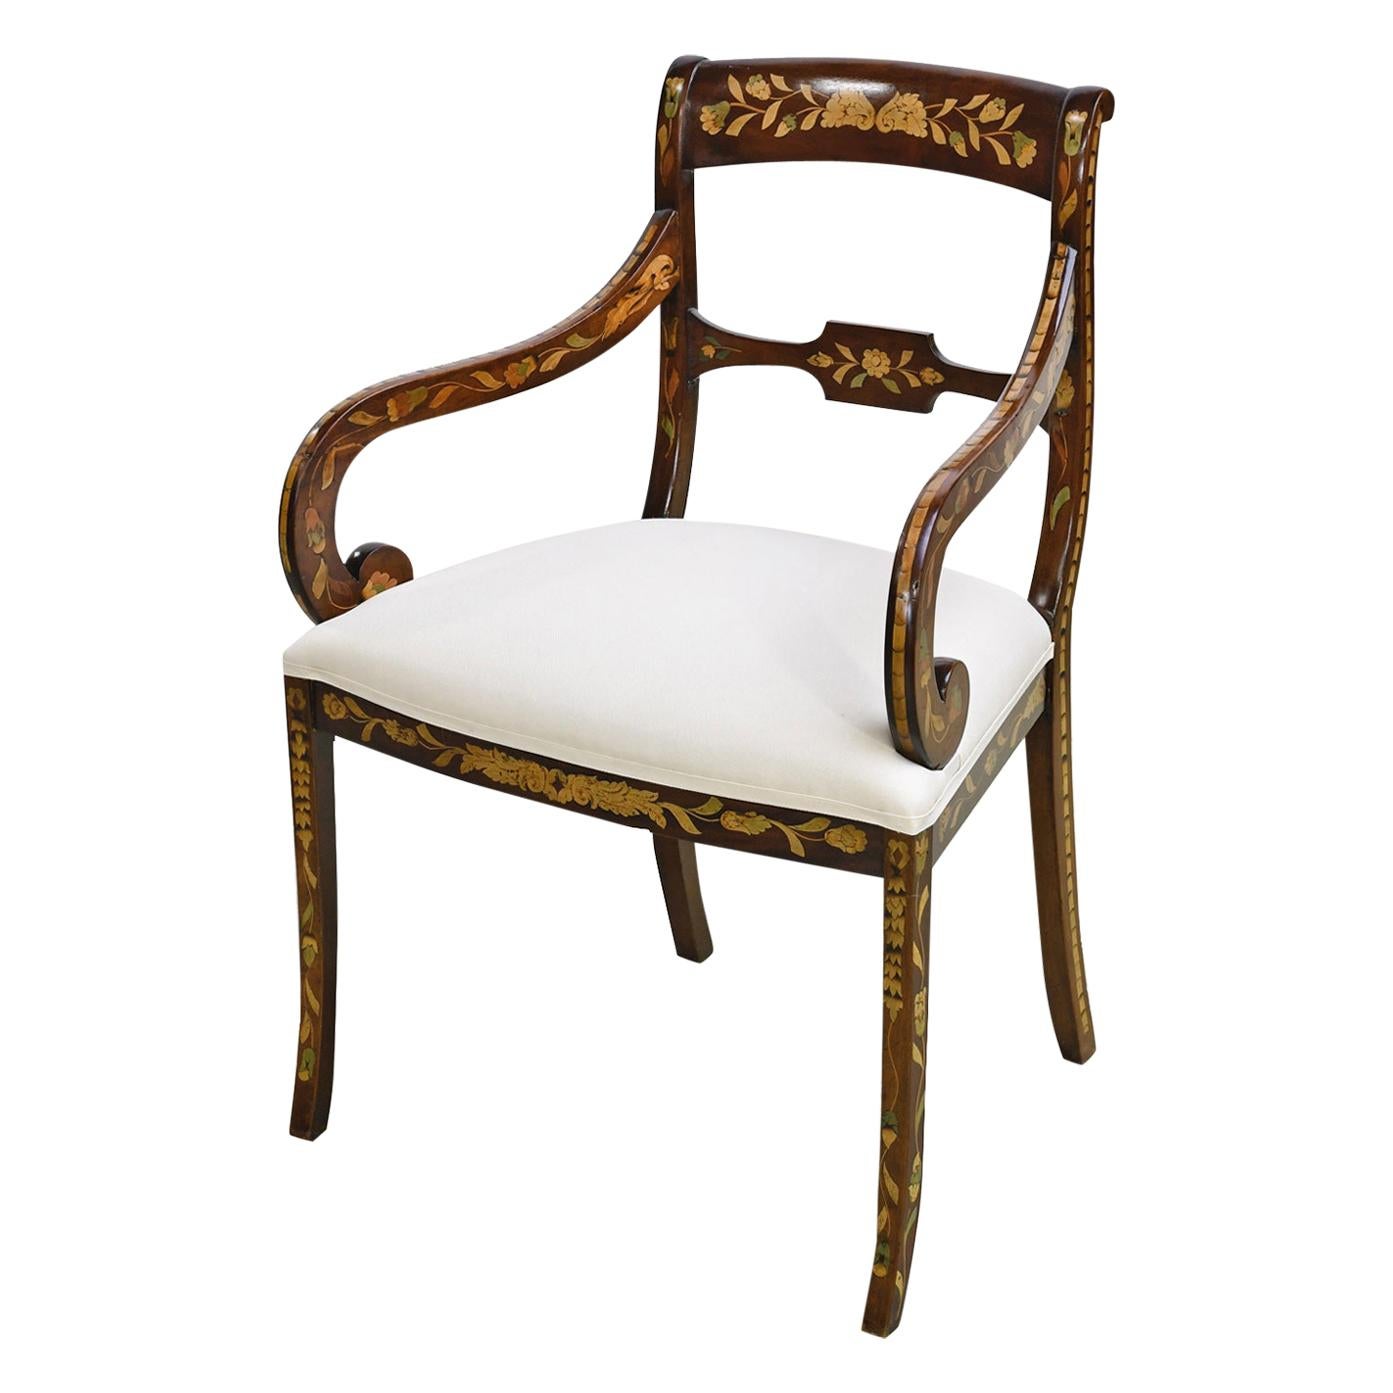 English Regency Mahogany Armchair w/ Floral Marquetry & Upholstered Seat, c 1820